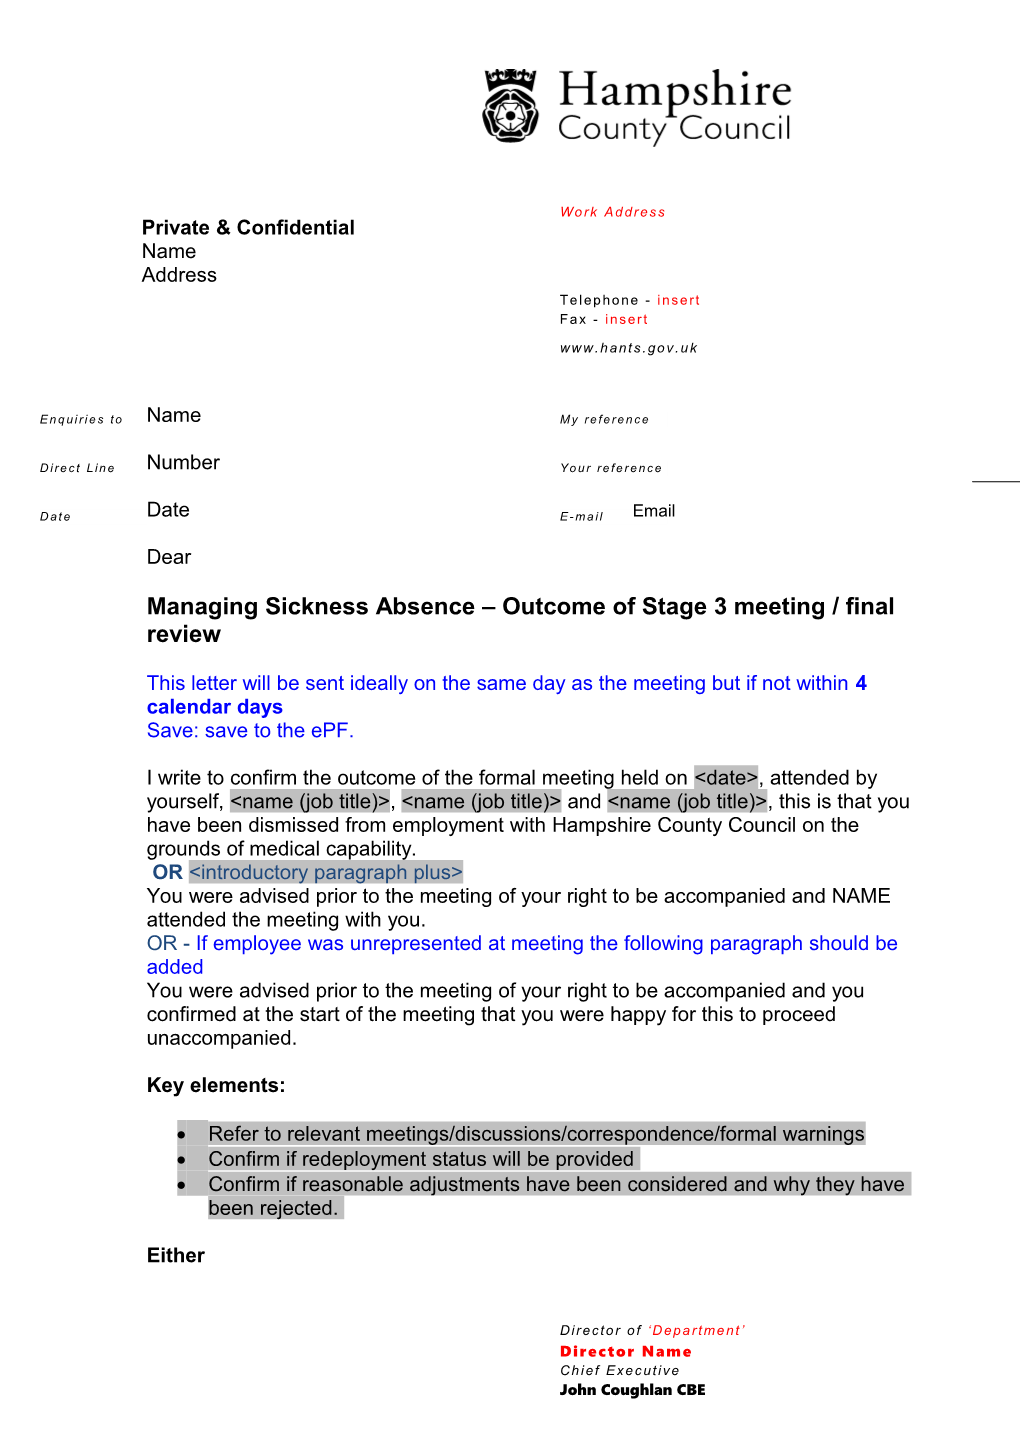 Managing Sickness Absence Outcome of Stage 3 Meeting / Final Review